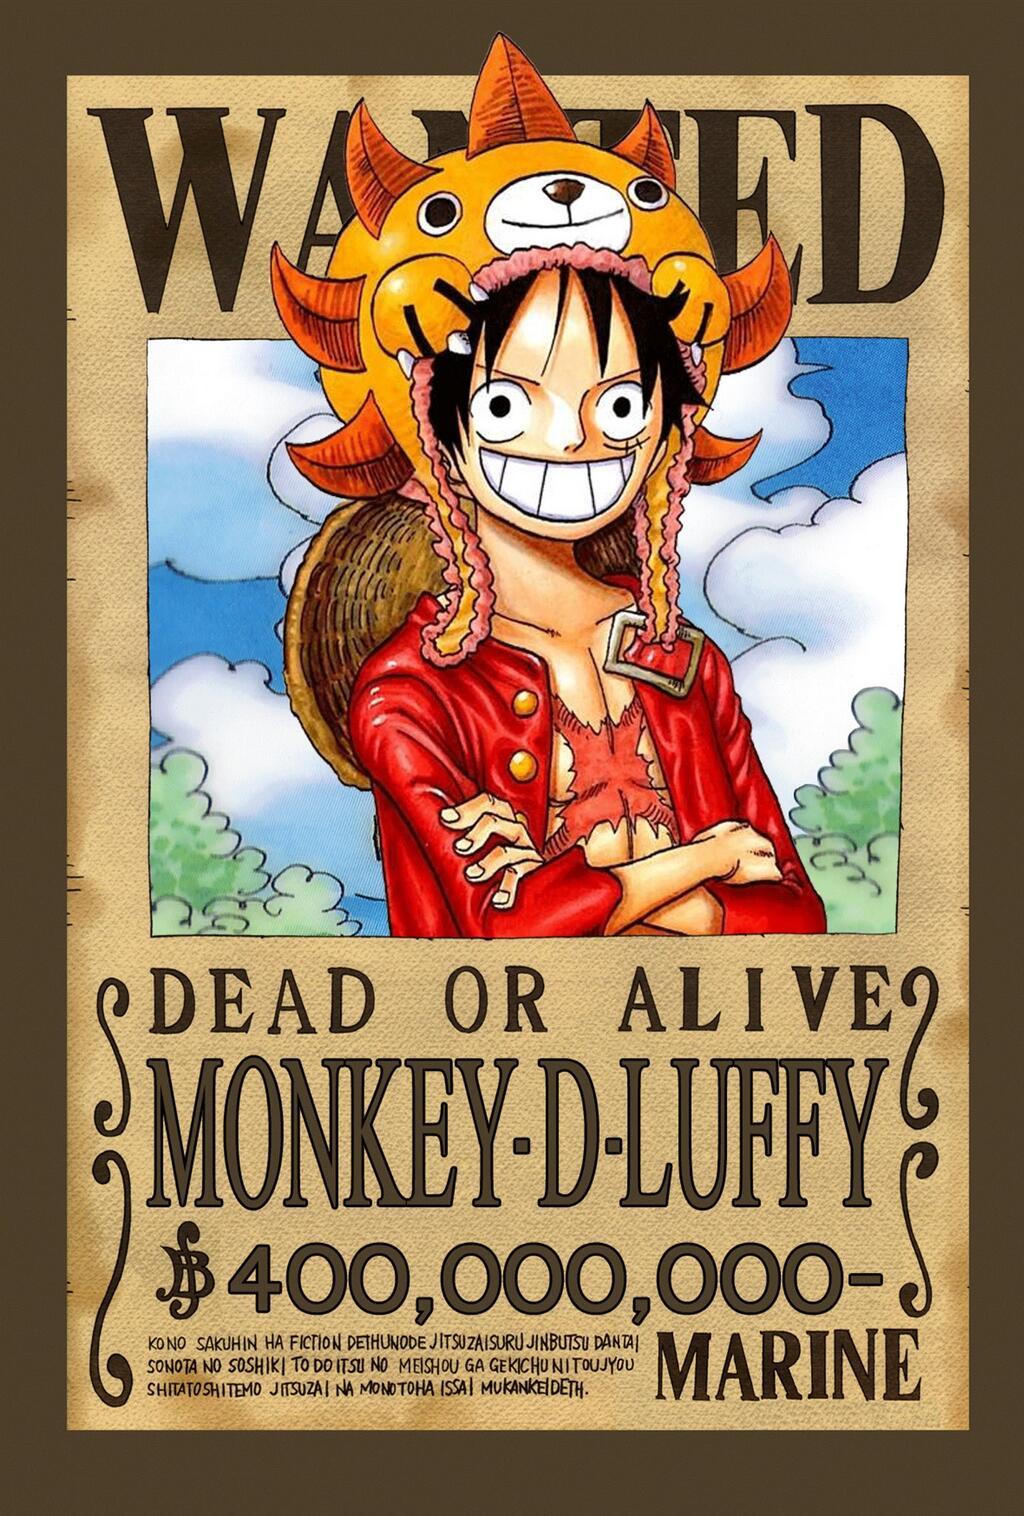 Monkey D. Luffy World Wanted Poster. One piece